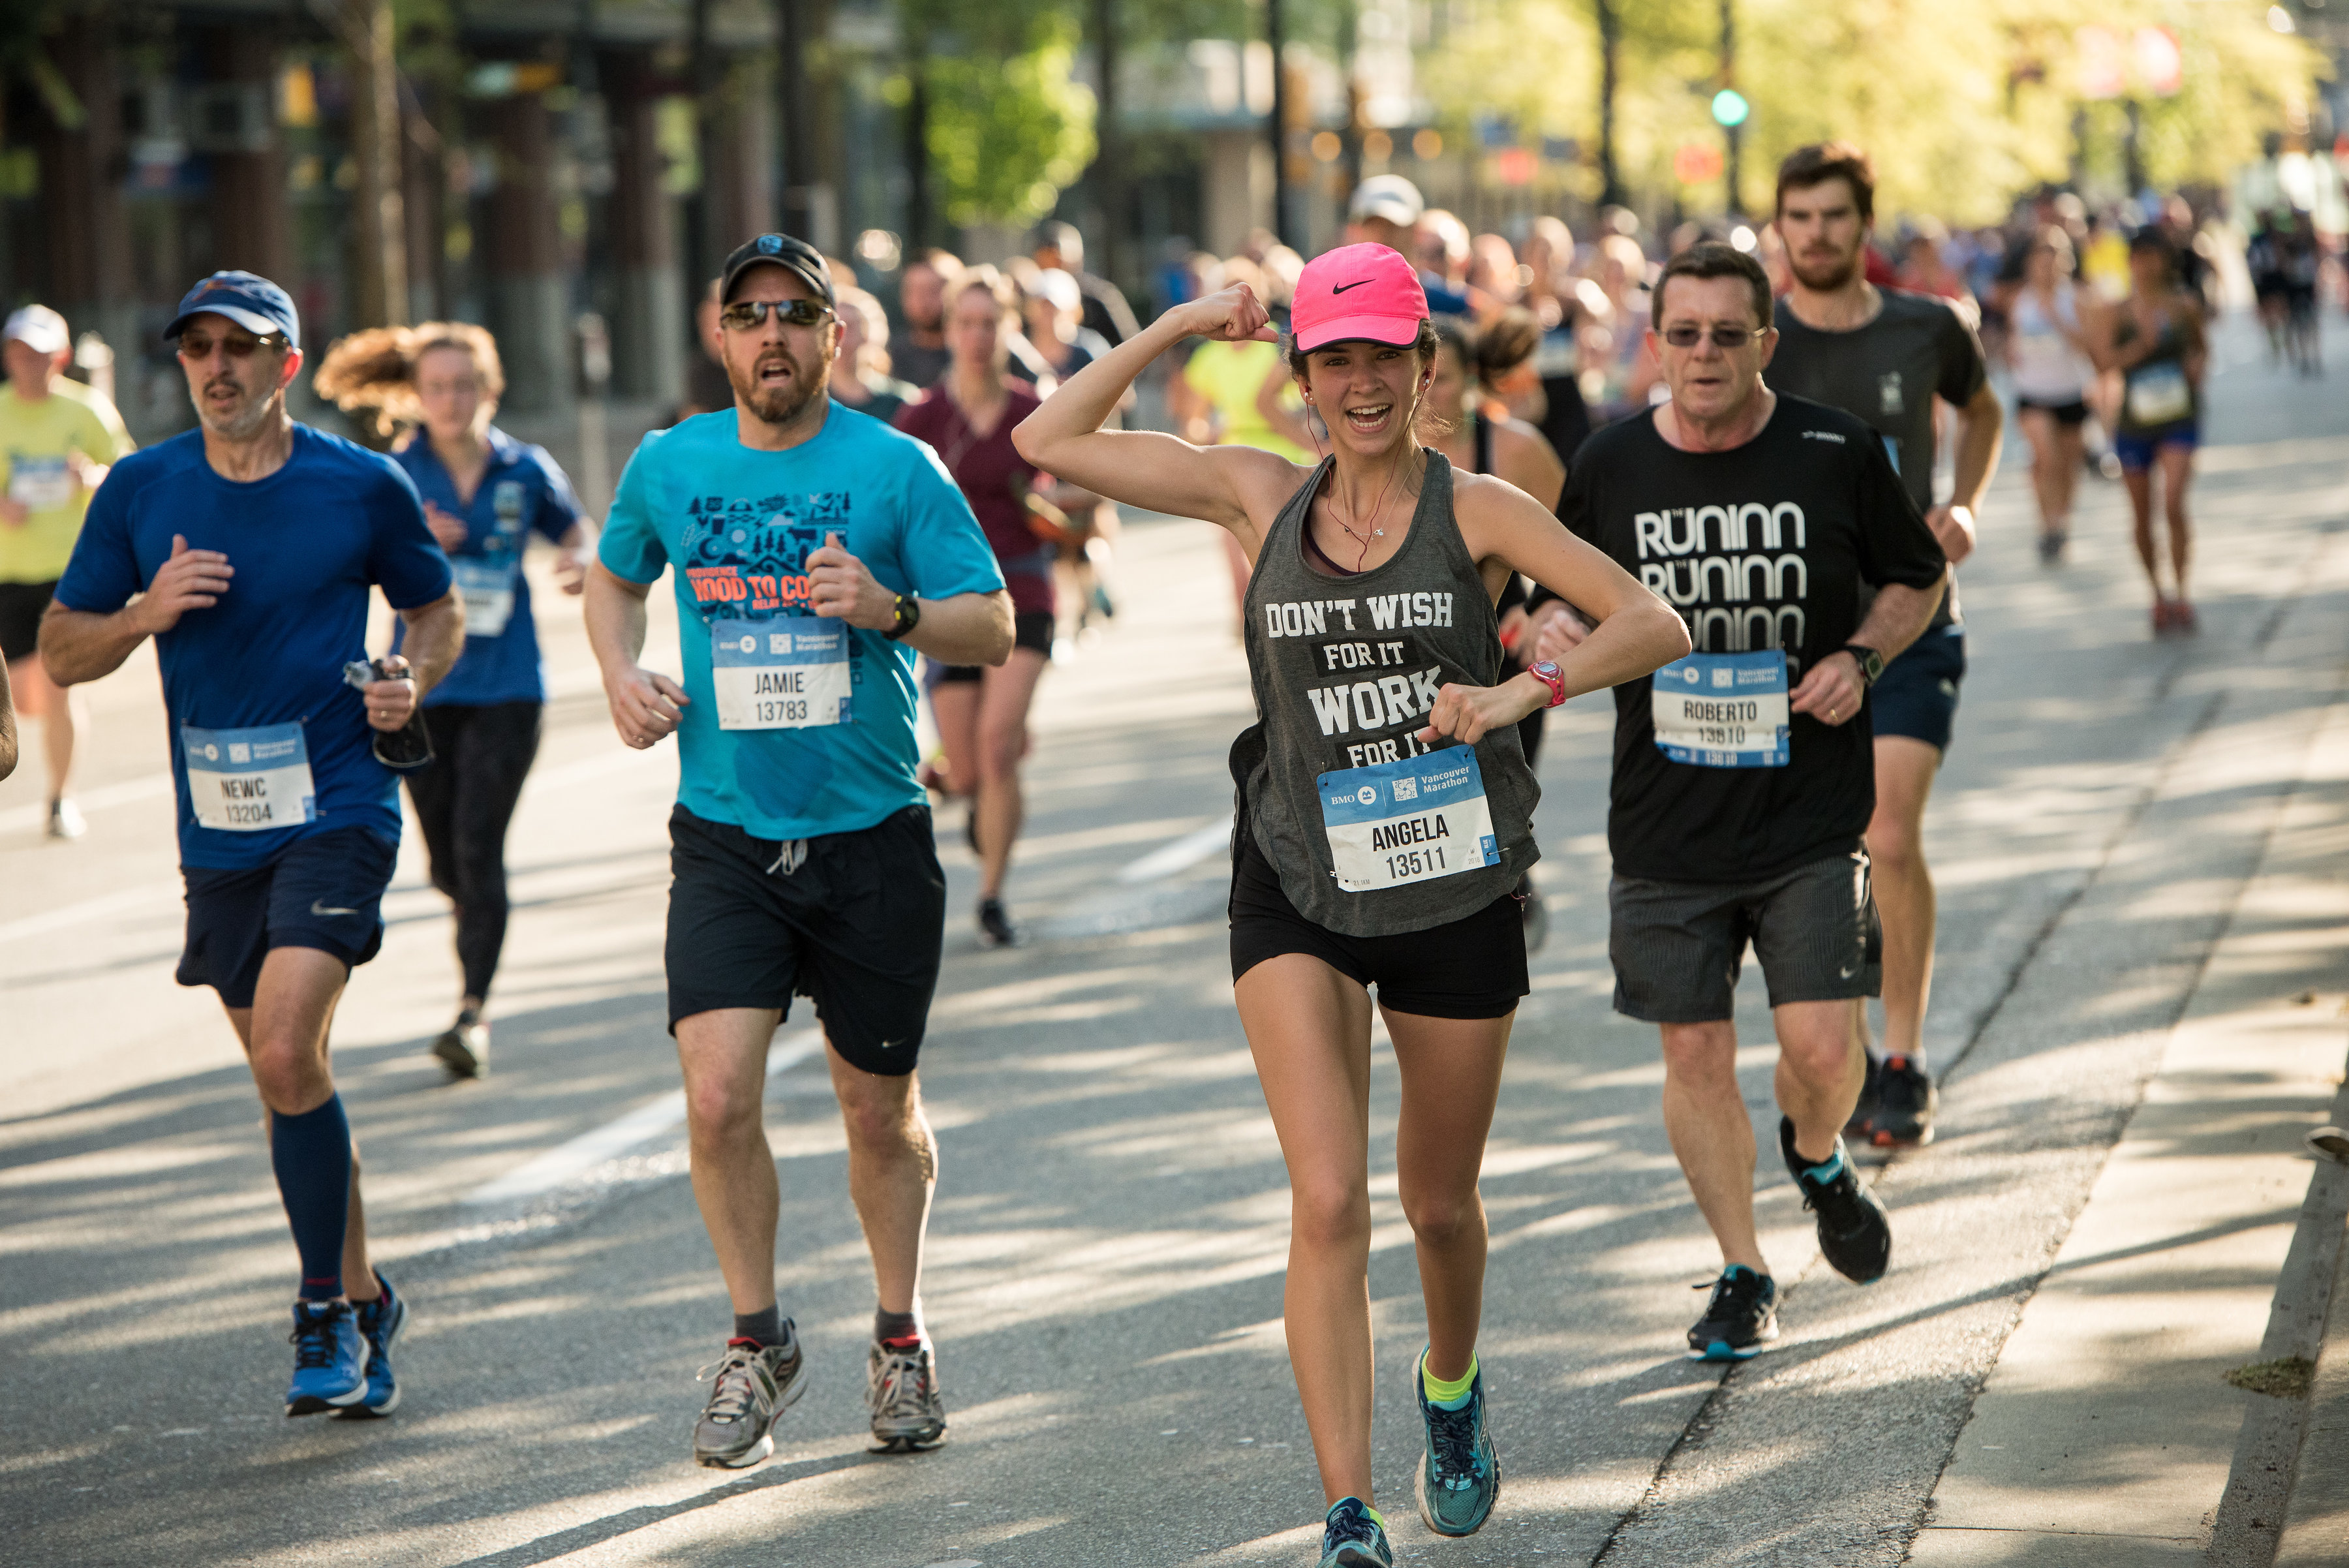 6 Tips for Running Your First Marathon